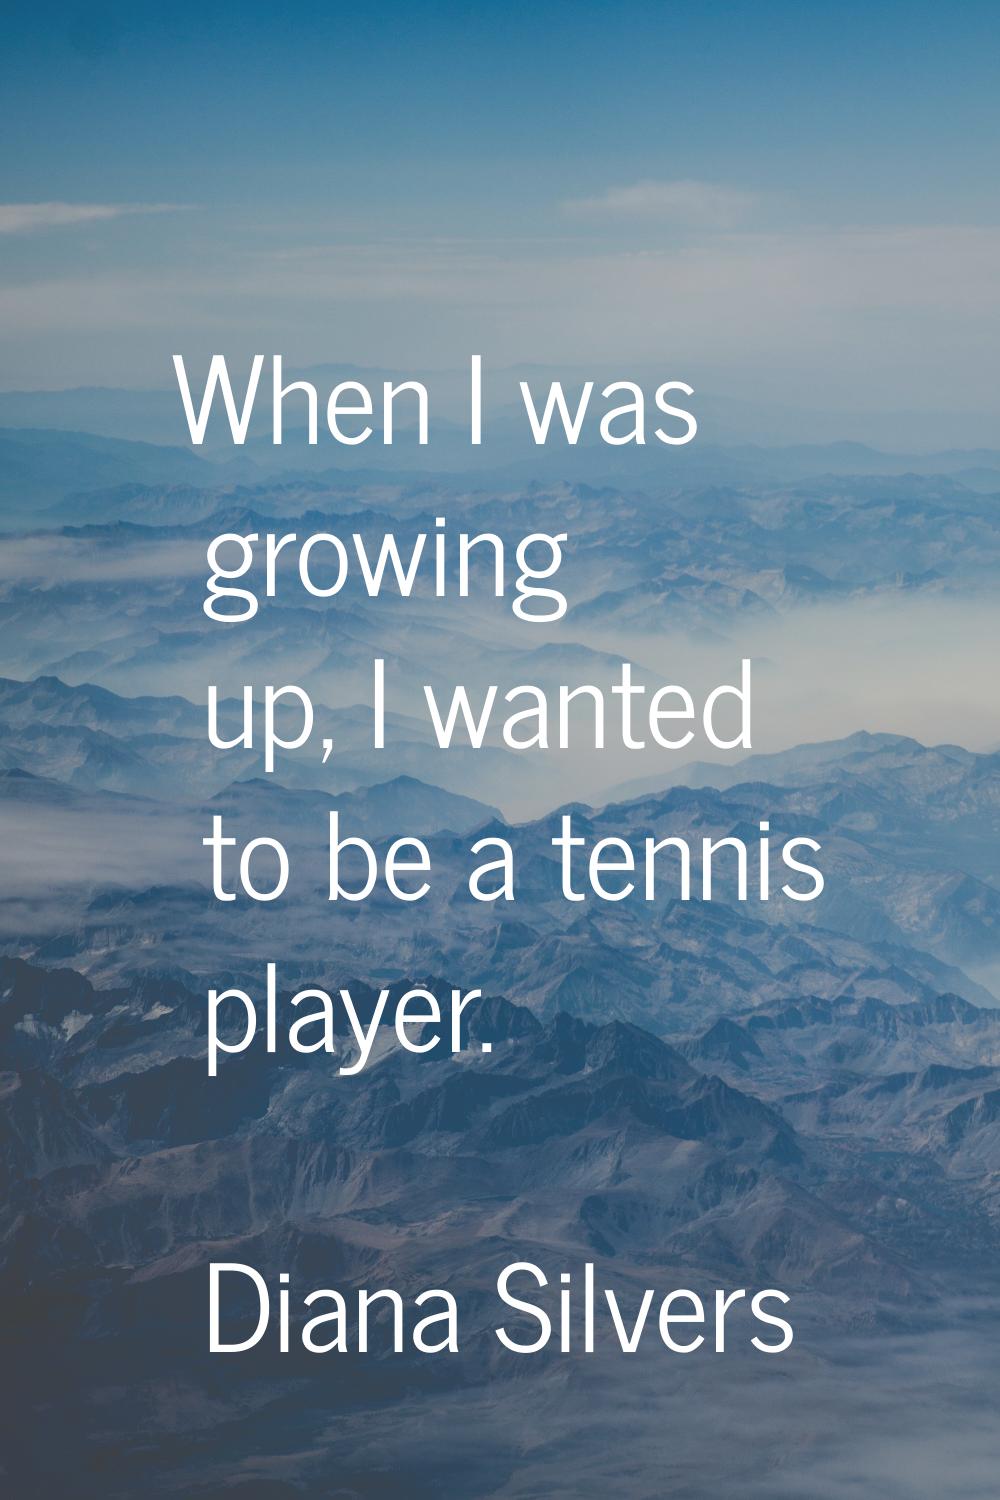 When I was growing up, I wanted to be a tennis player.